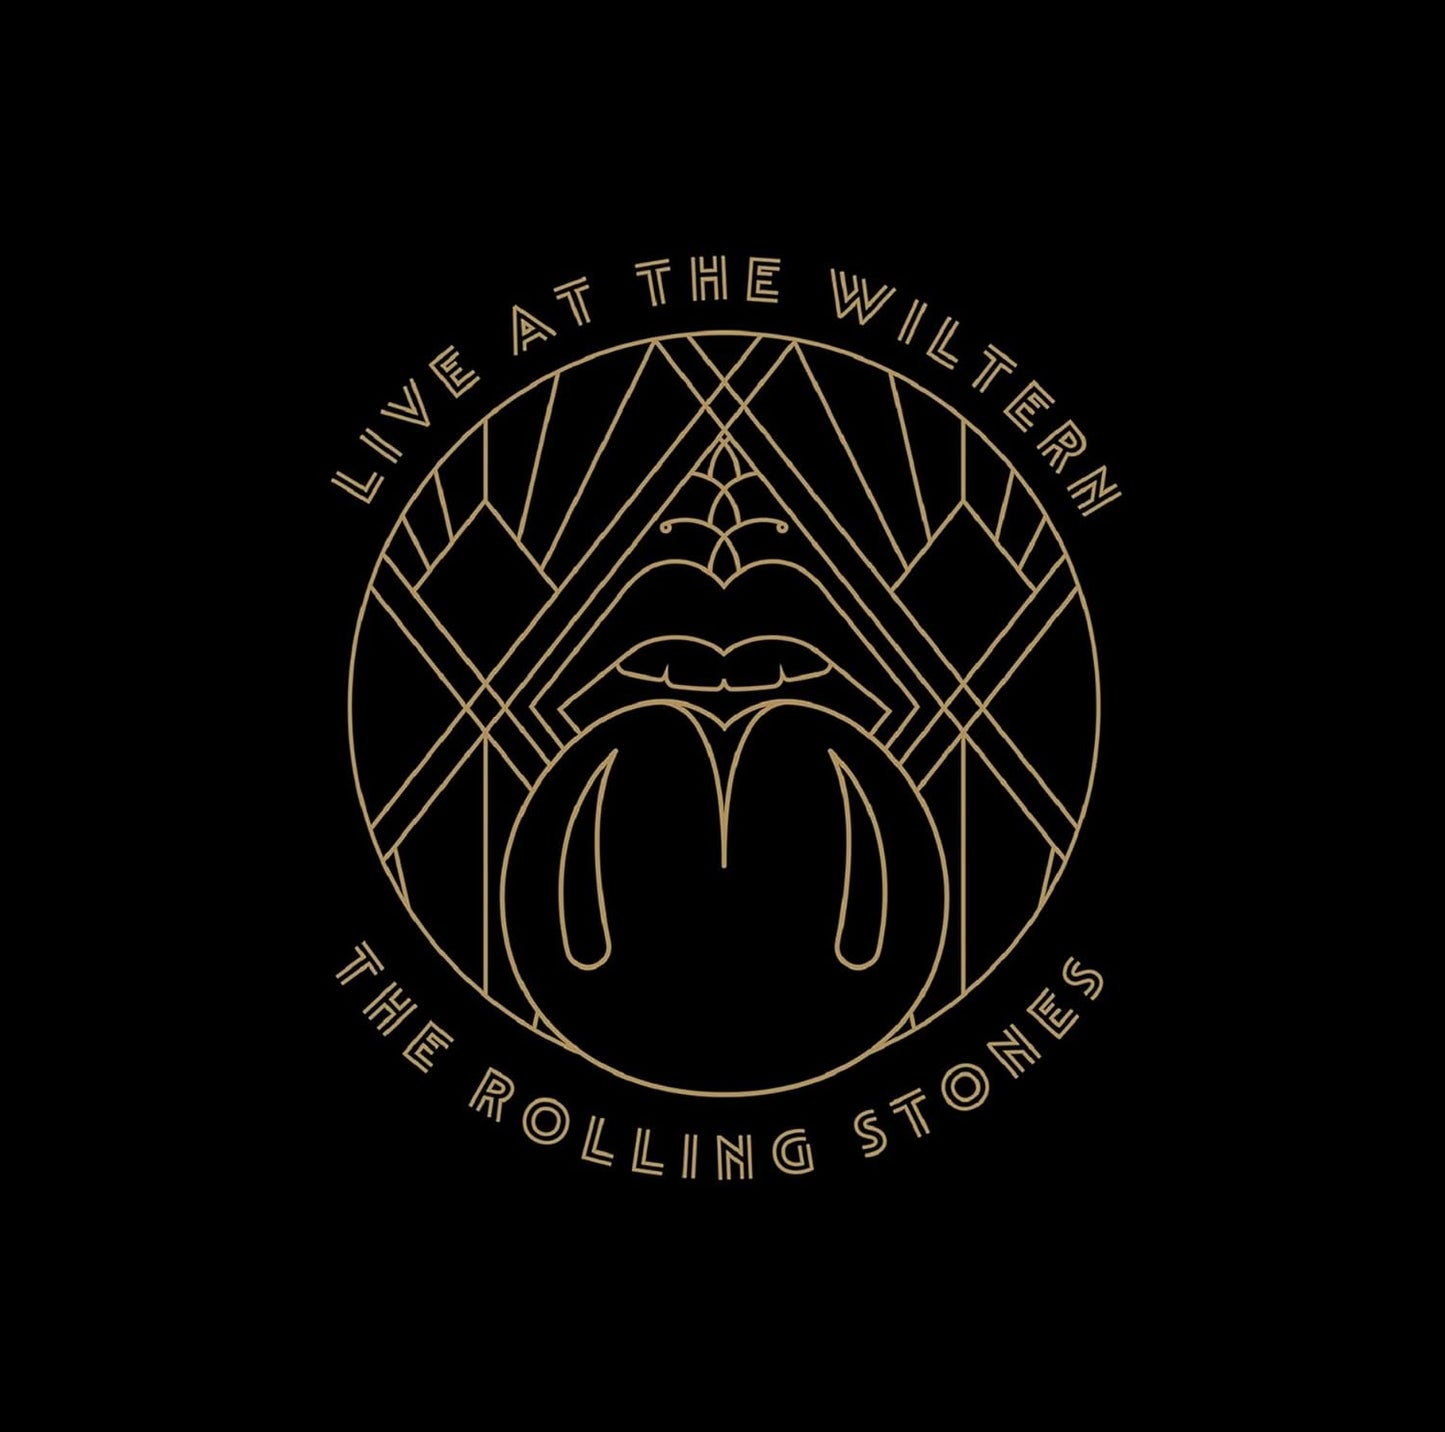 2CD - Rolling Stones - Live At The Wiltern